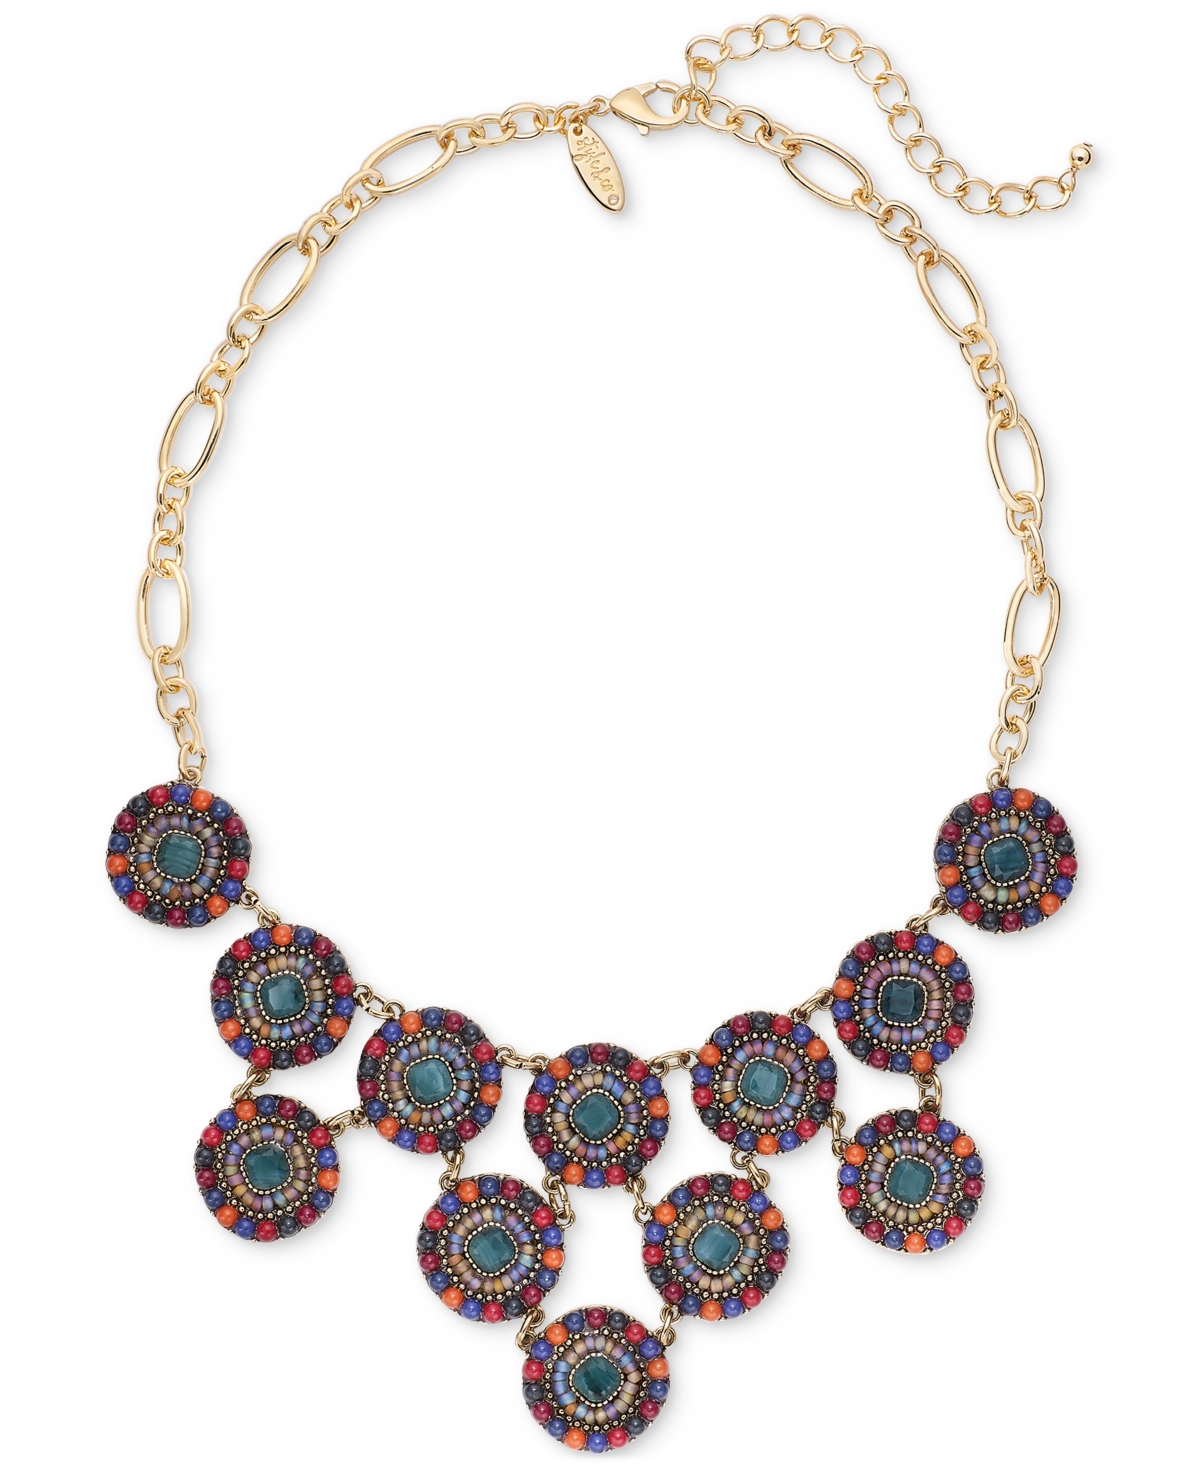 Beaded Circle Statement Necklace, 17" + 3" extender, Created for Macy's - Multi